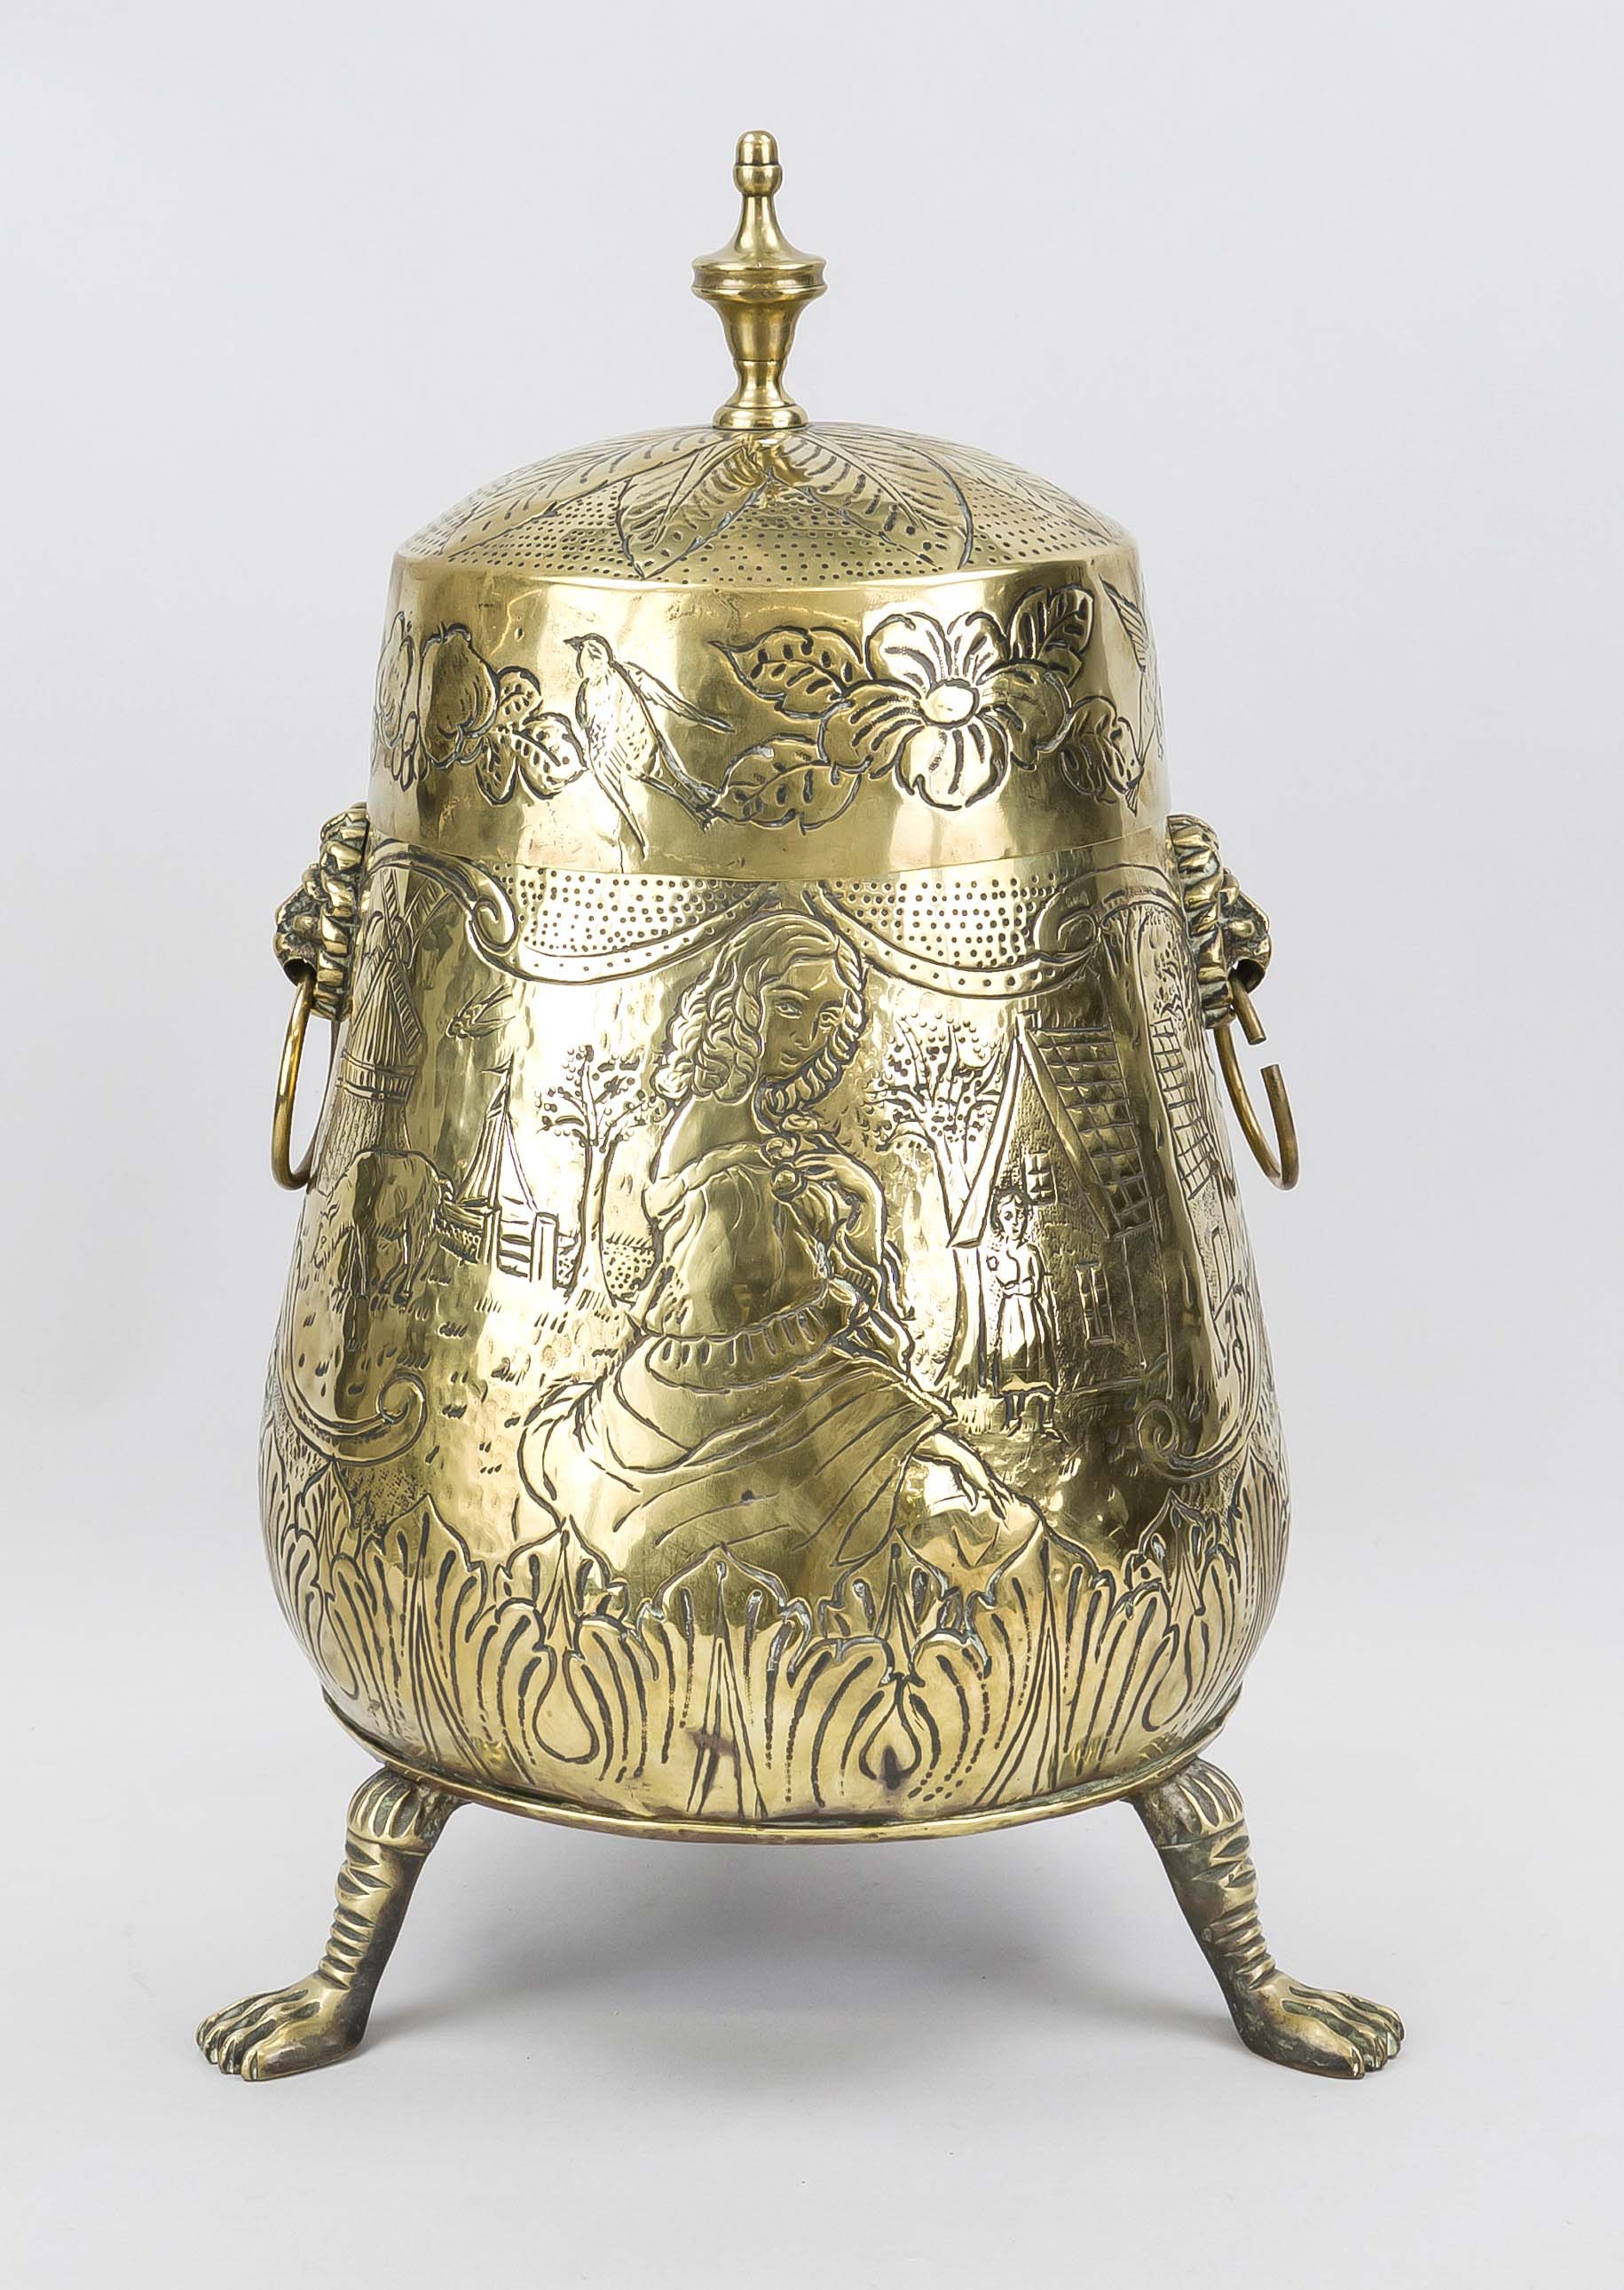 Urn, Holland 19th century, brass. Slightly conical container on 3 paw feet, ring handles on lion